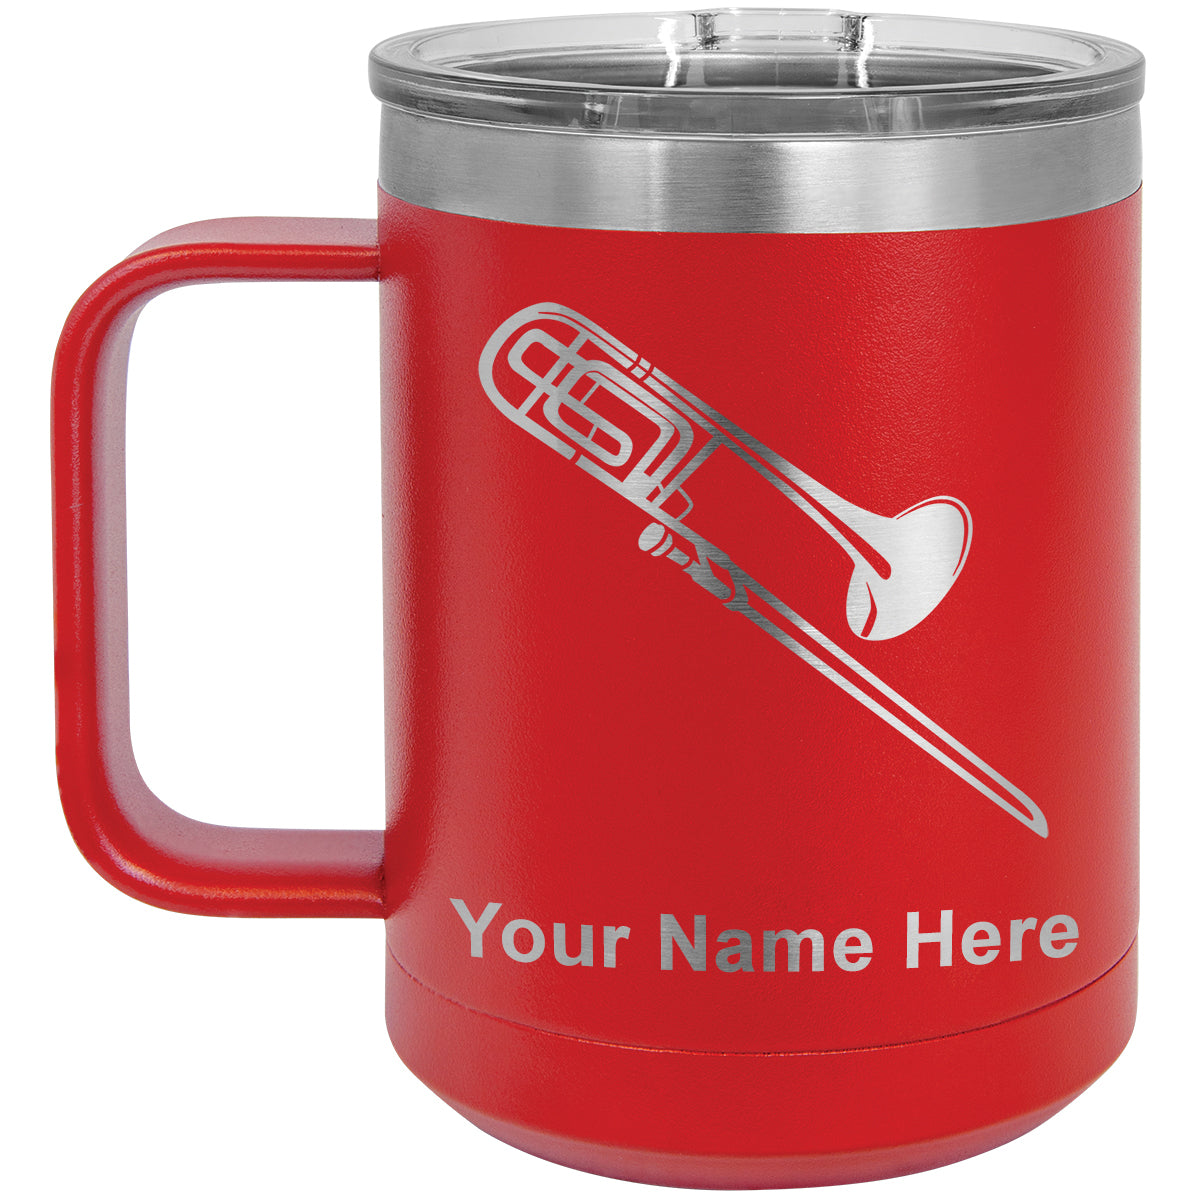 15oz Vacuum Insulated Coffee Mug, Trombone, Personalized Engraving Included